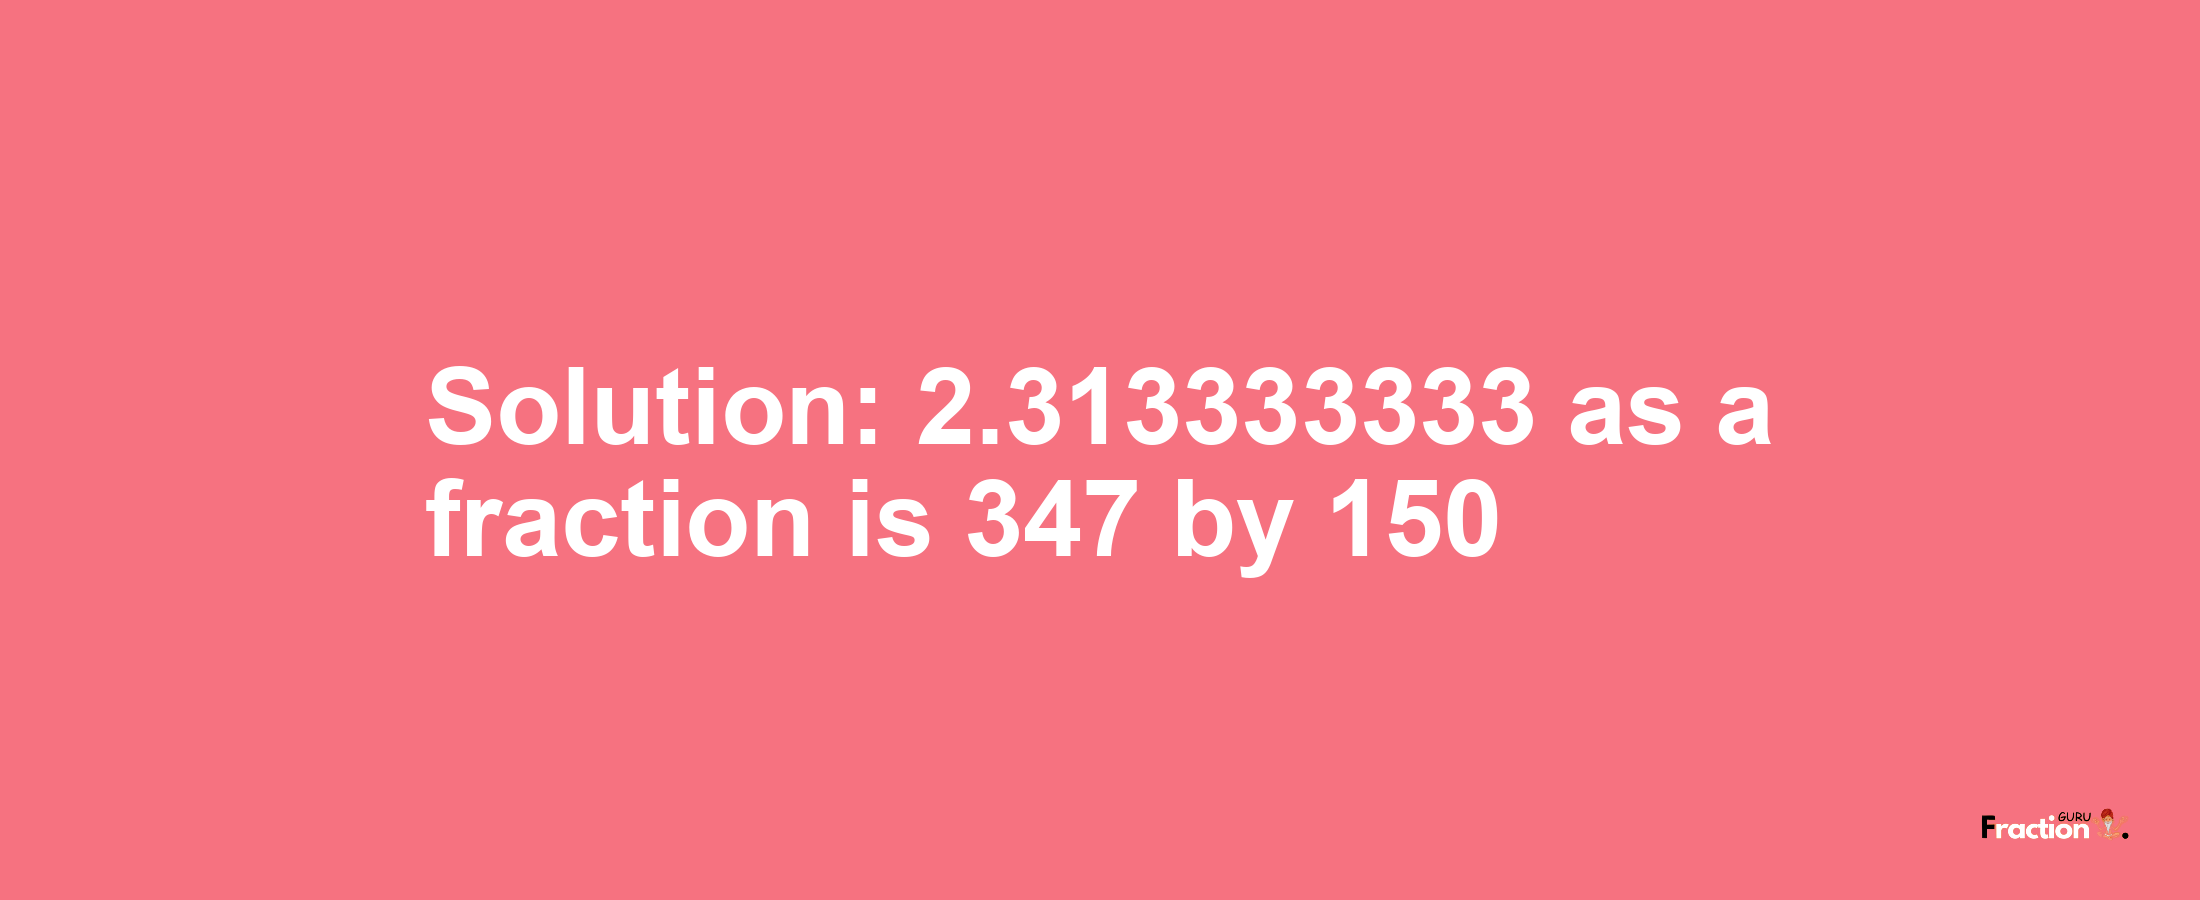 Solution:2.313333333 as a fraction is 347/150